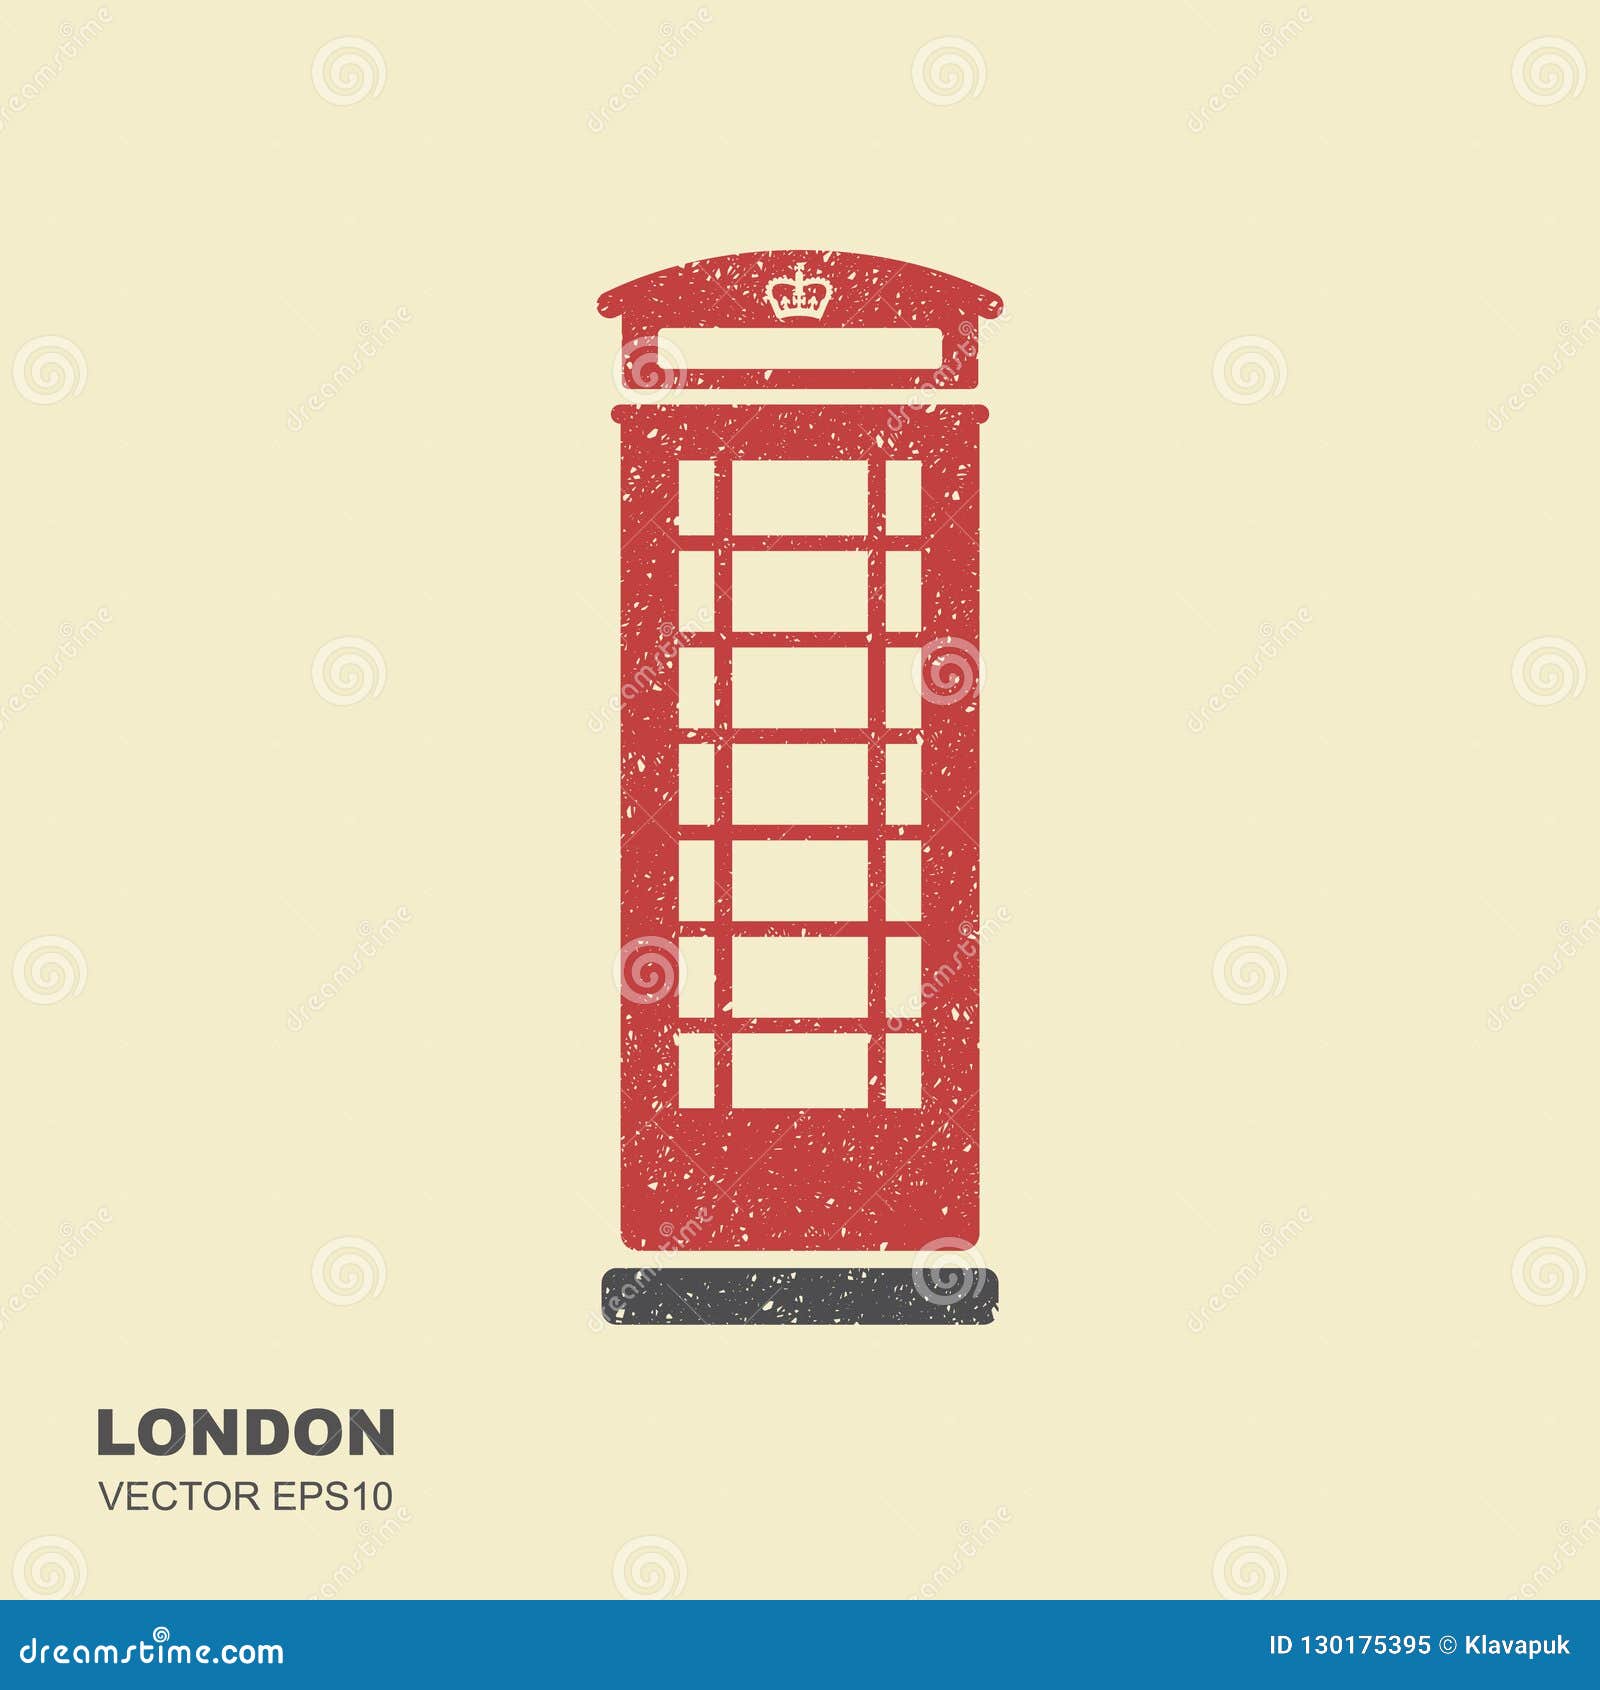 london telephone booth. flat icon with scuffed effect